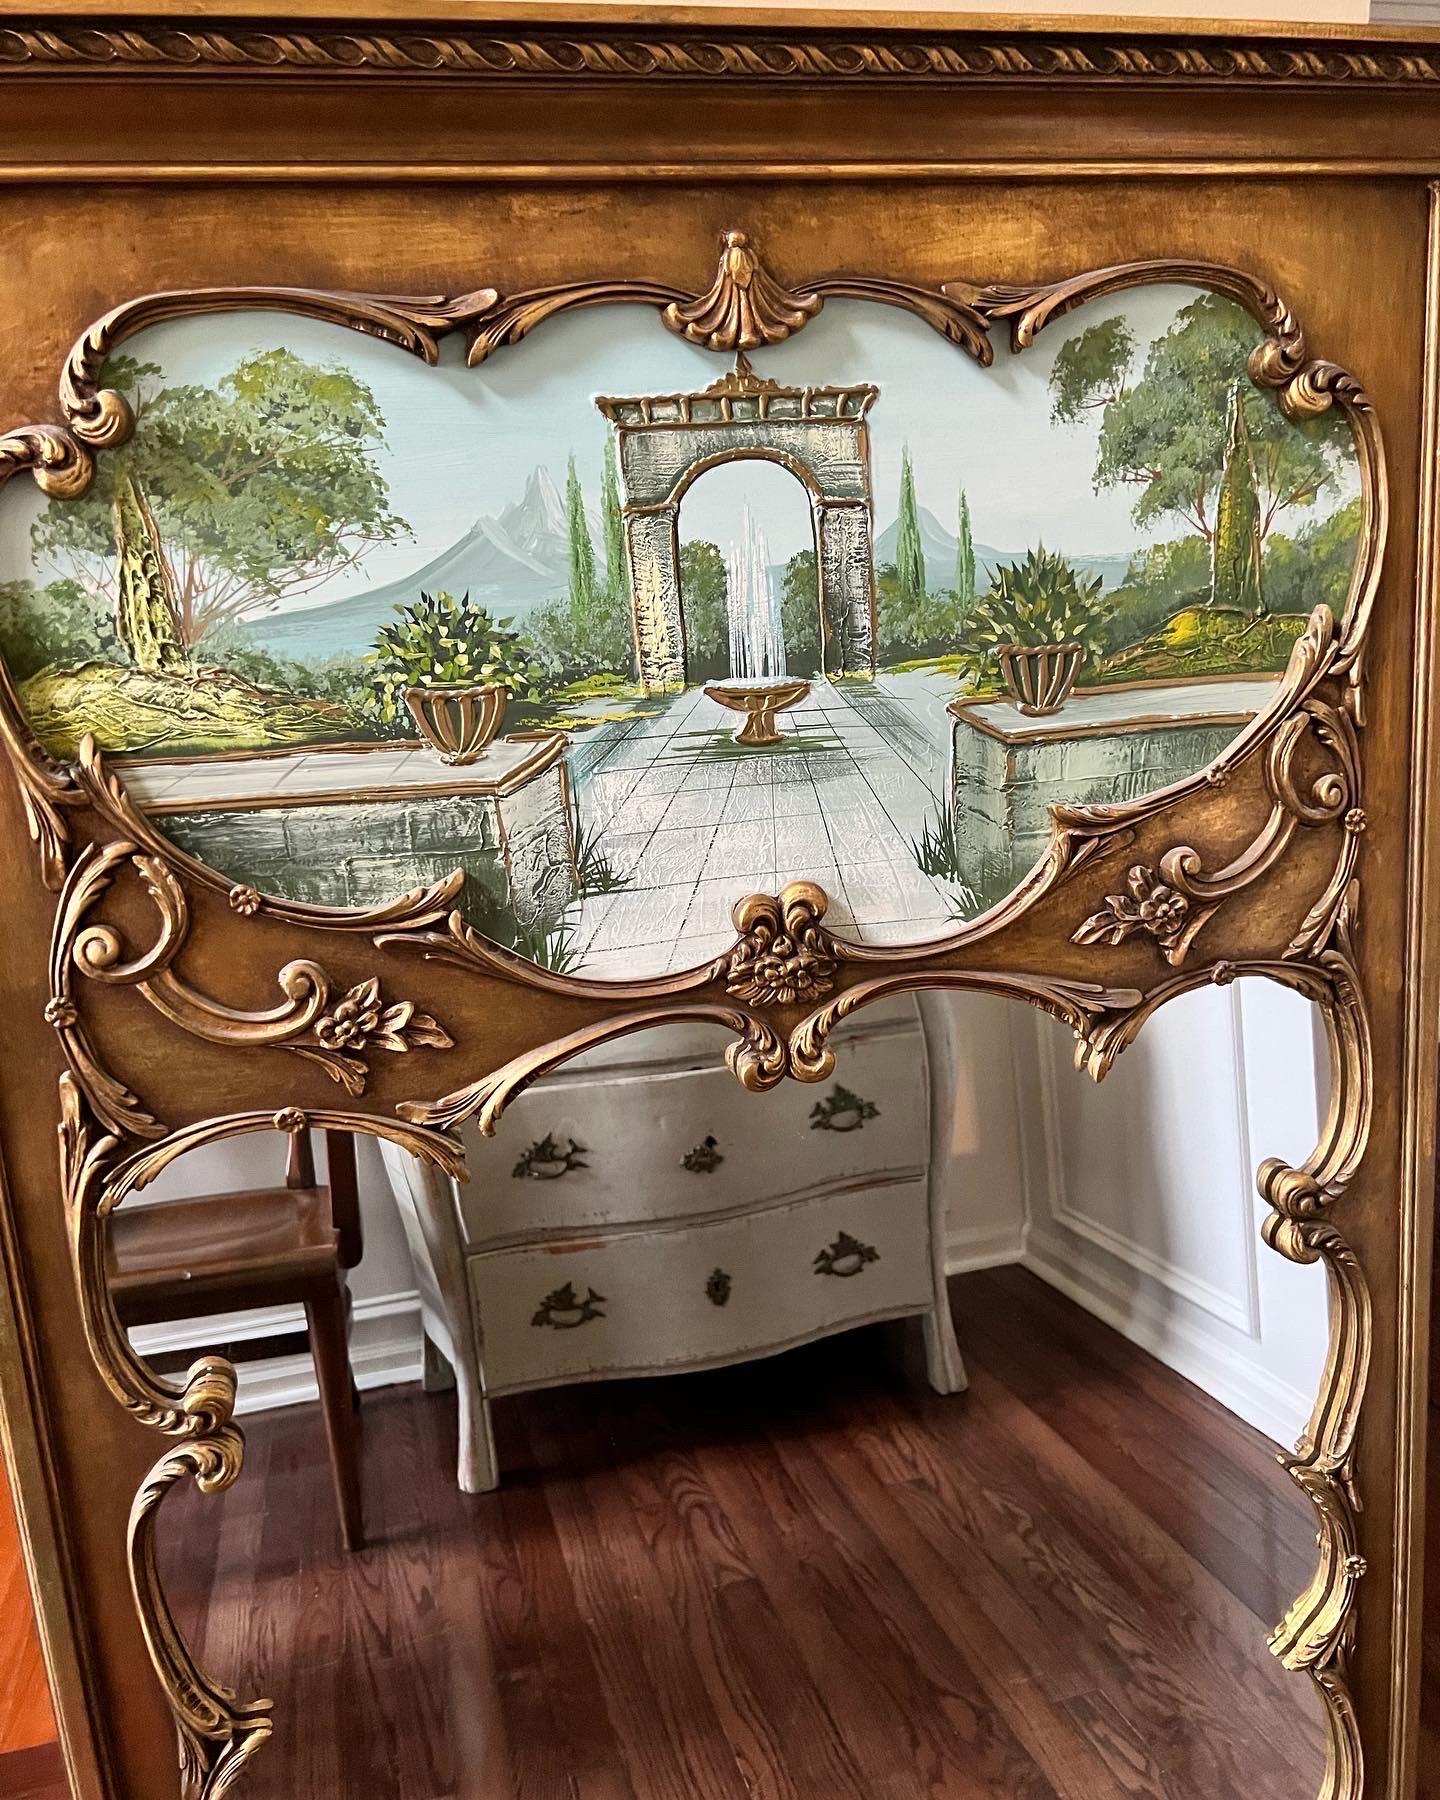 Fabulous vintage Trumeau giltwood mirror with tranquil painting. 

Surrounded by an elaborately carved gold wood frame, the lovely ornamental garden scene offers textural depth and a pleasing color palette highlighted with gold accent. 

This